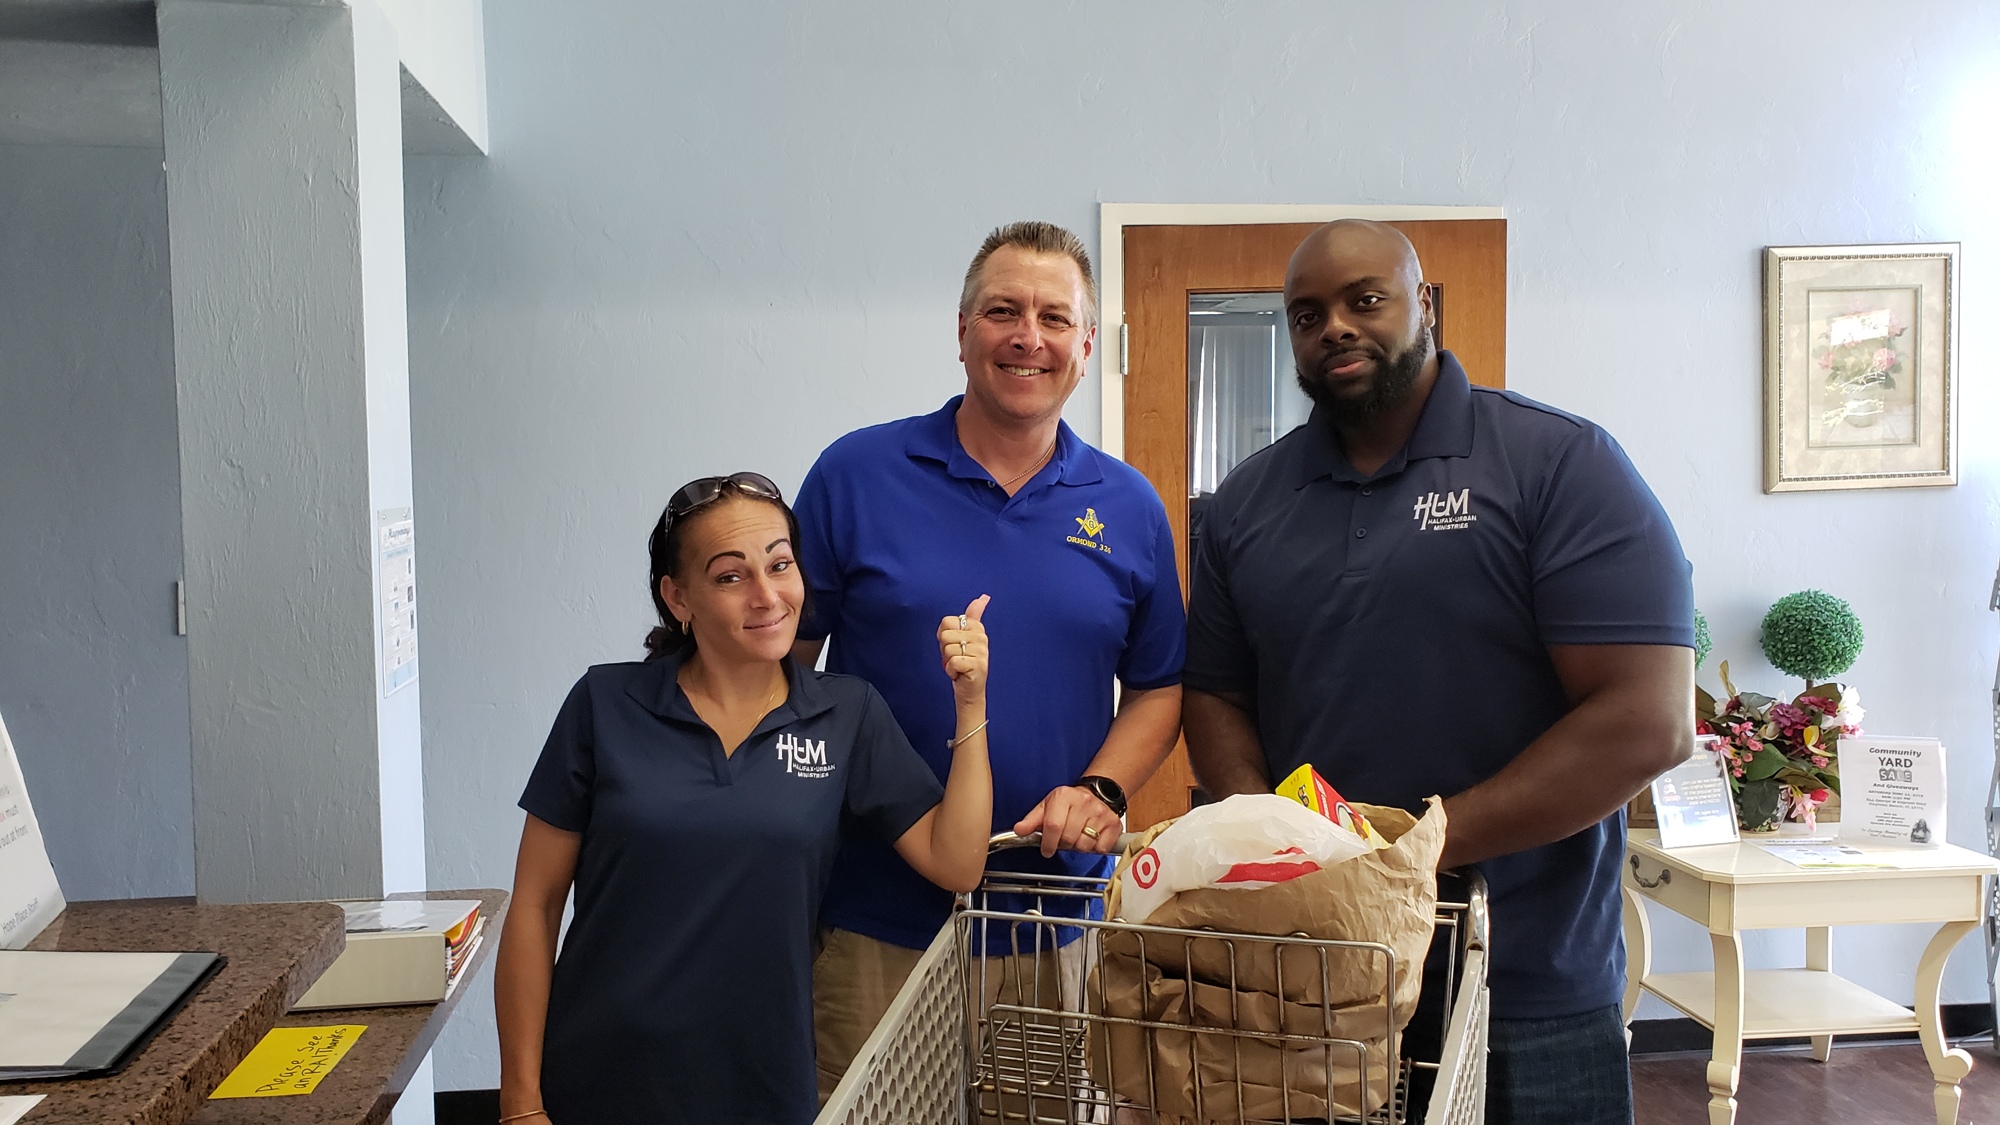 Master of Ormond Beach Masonic Lodge #326 Paul Foege donates food collected at the Lodge for Halifax Urban Ministries on June 23. Courtesy photo